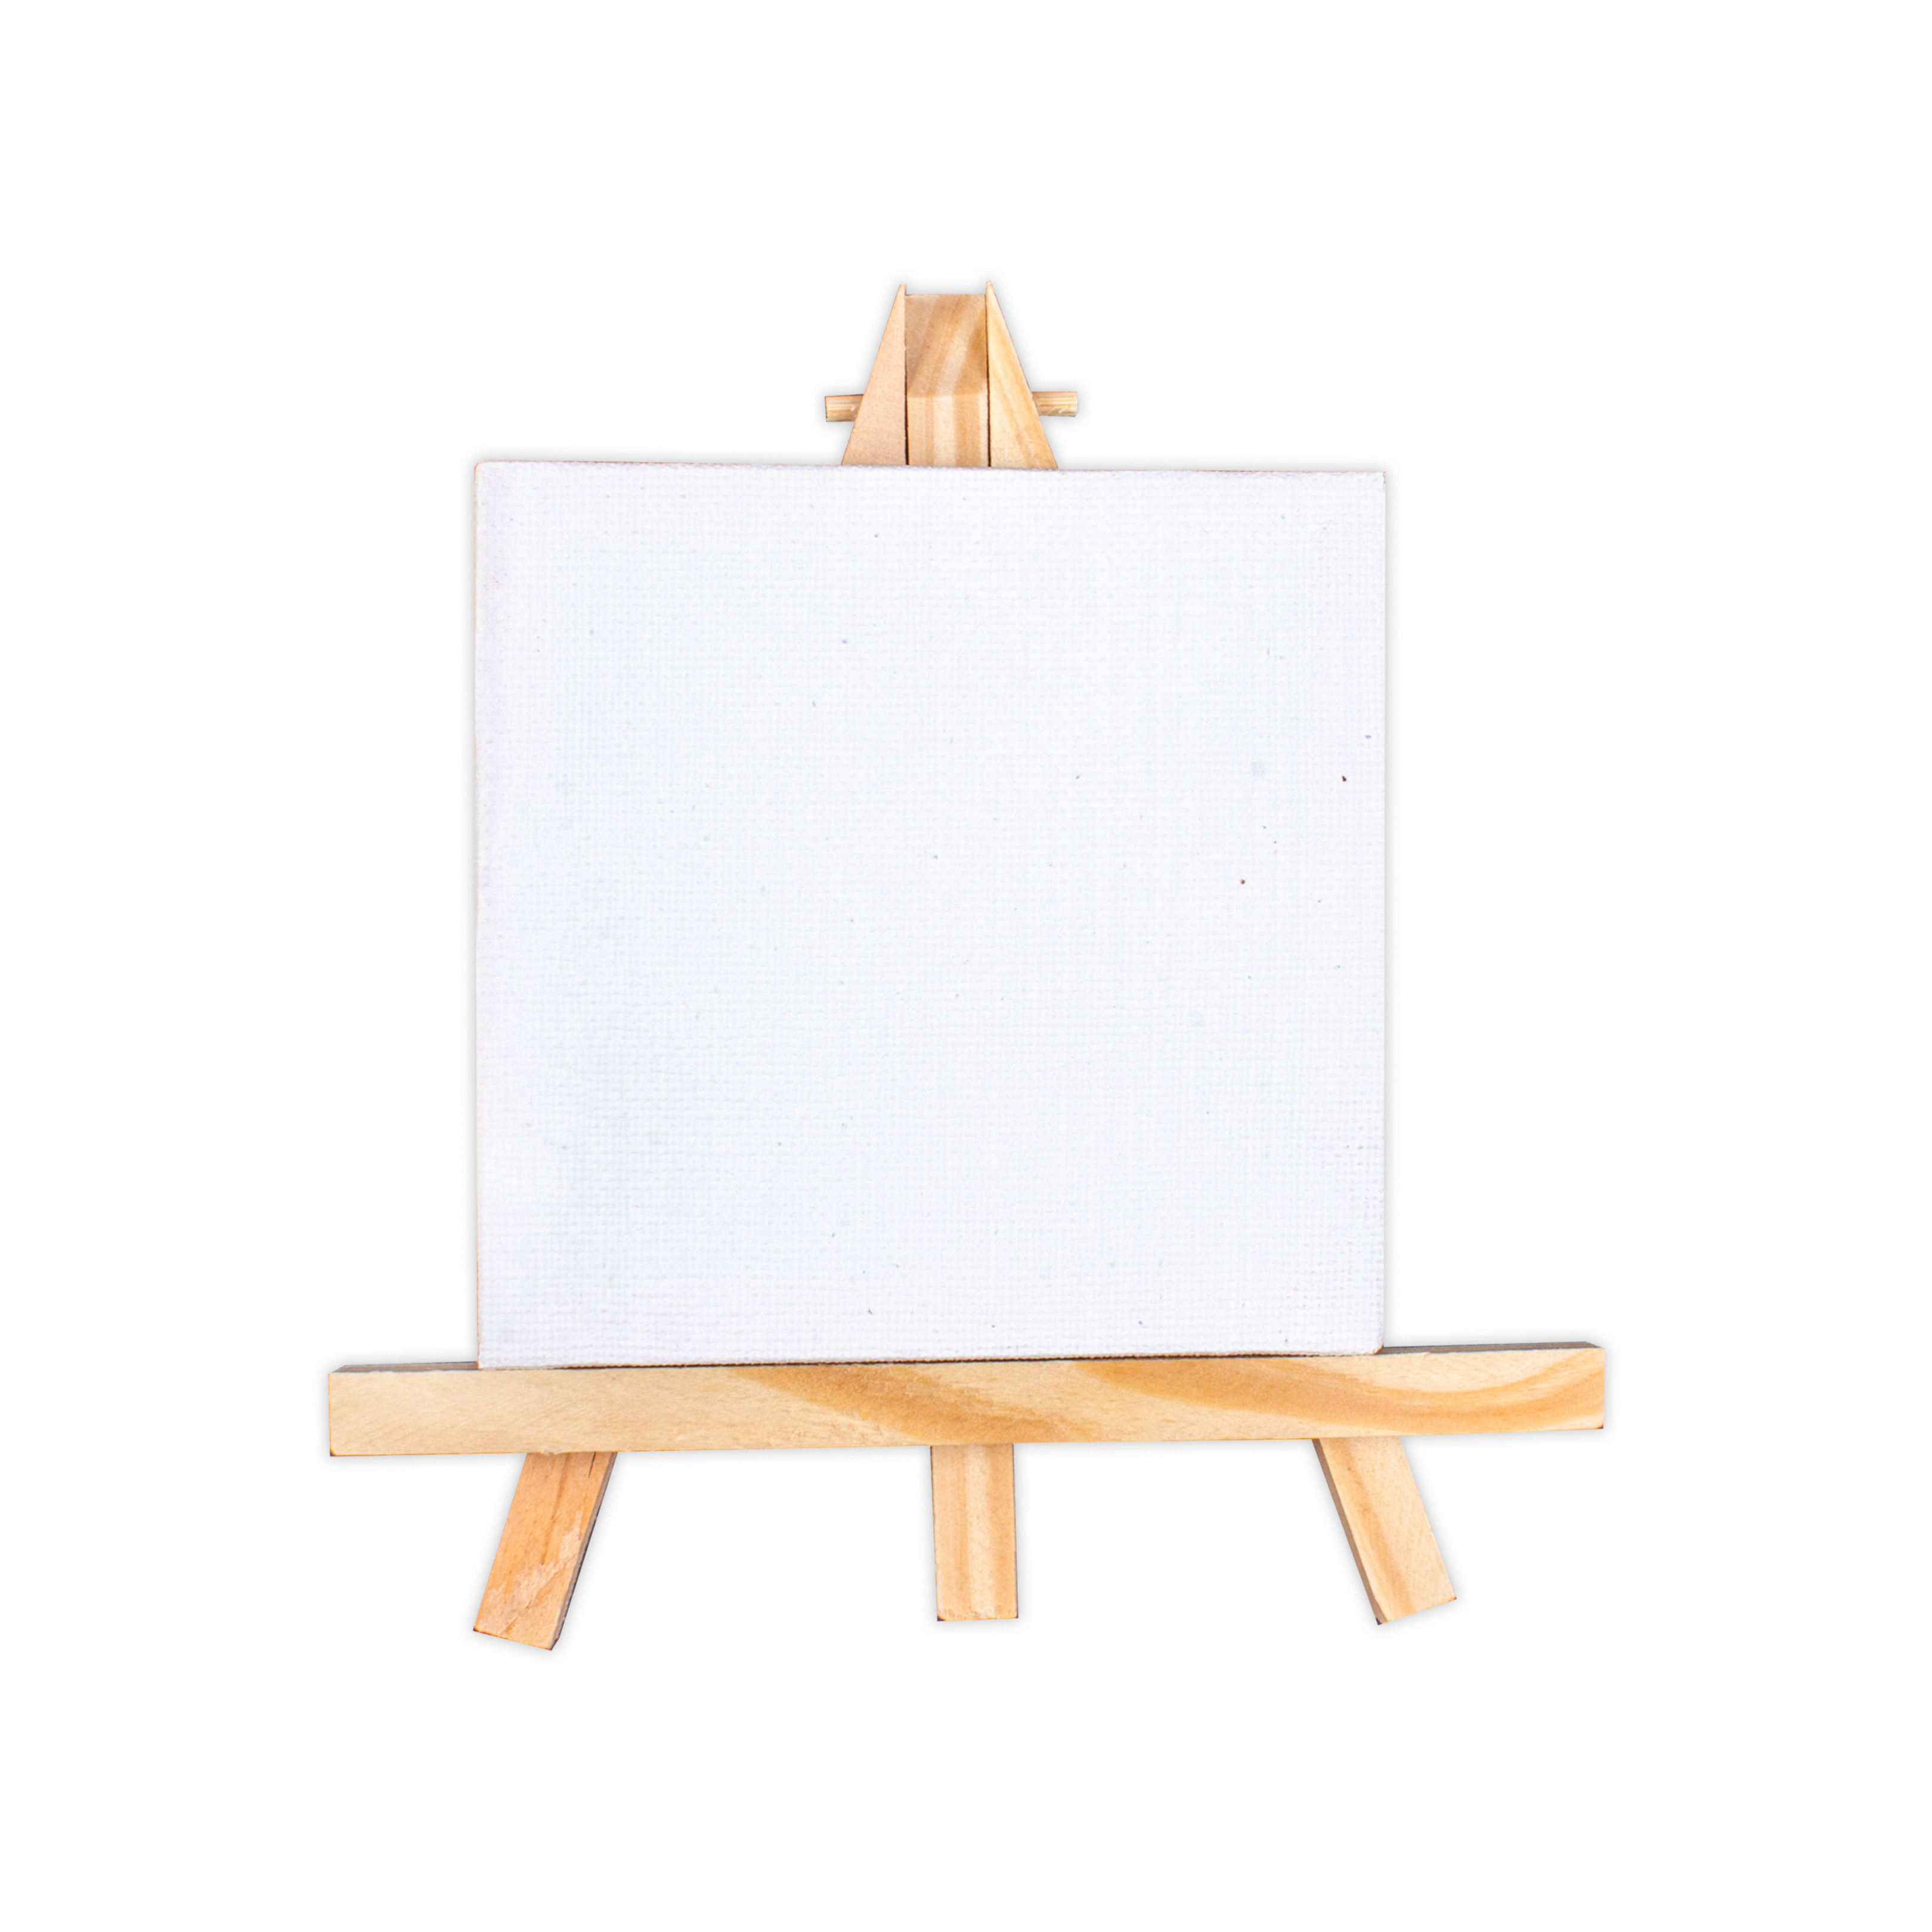 Wooden Mini Easel With Canvas Easel Size 15cm Canvas Size 10 X 10cm 1pc